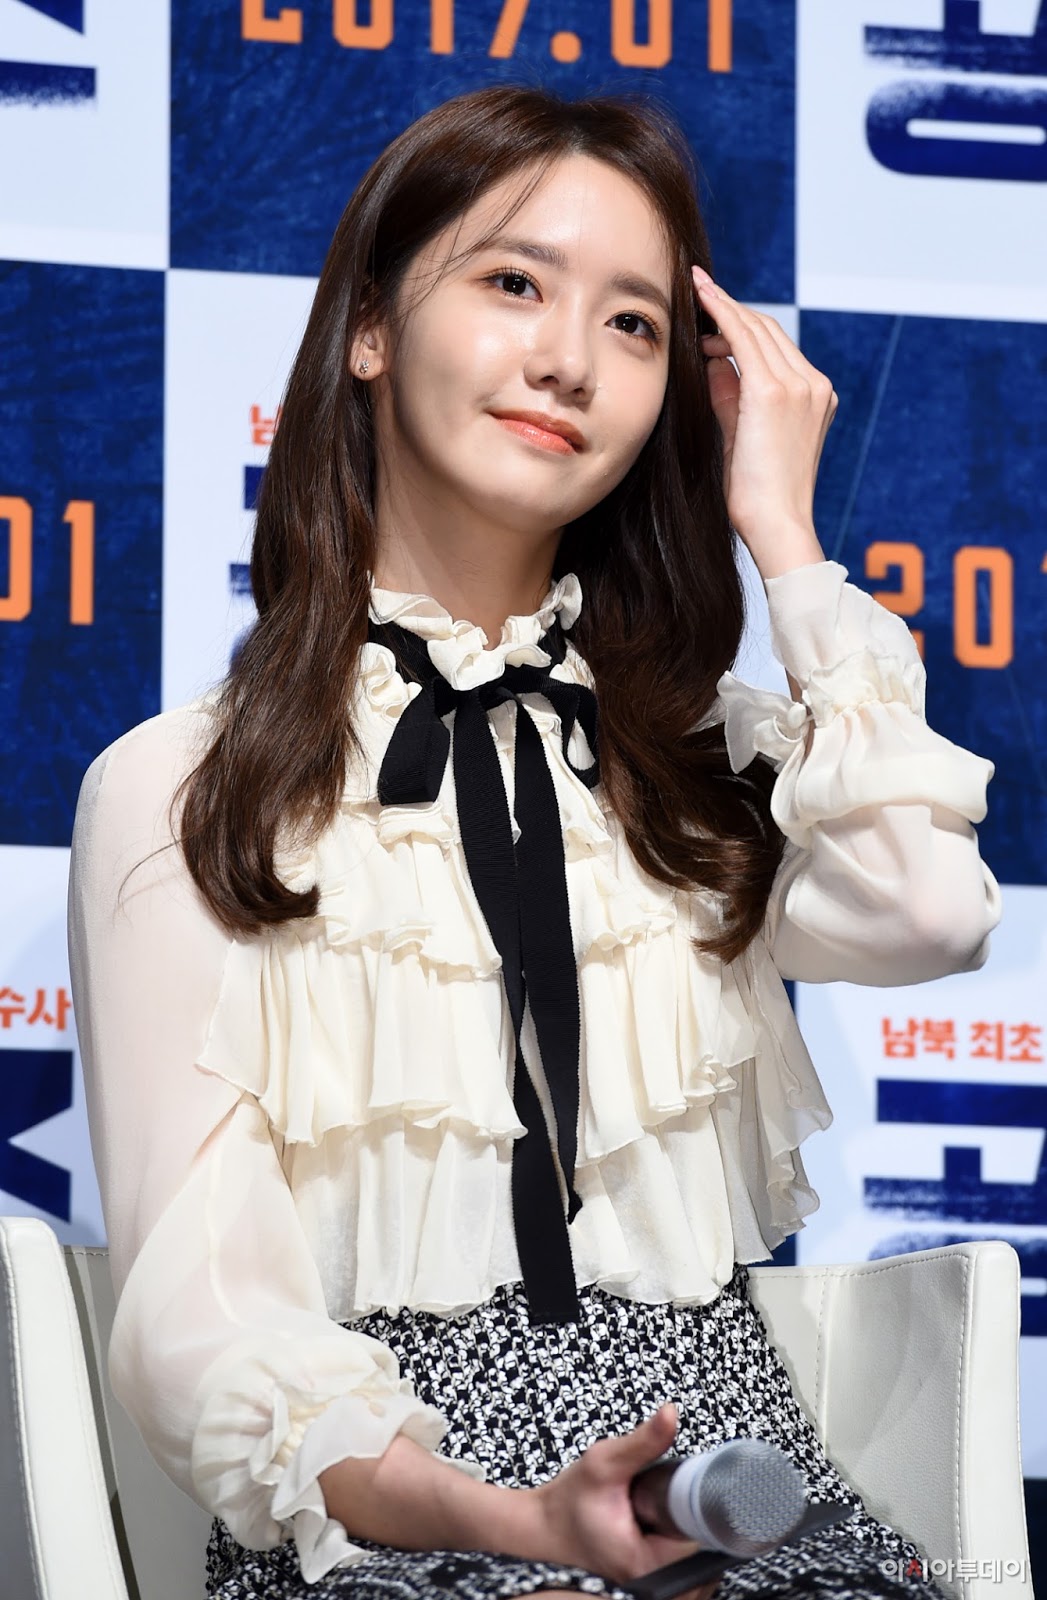 SNSD YoonA at the Press Conference of 'Cooperation' - SNSD | OH!GG | f(x)